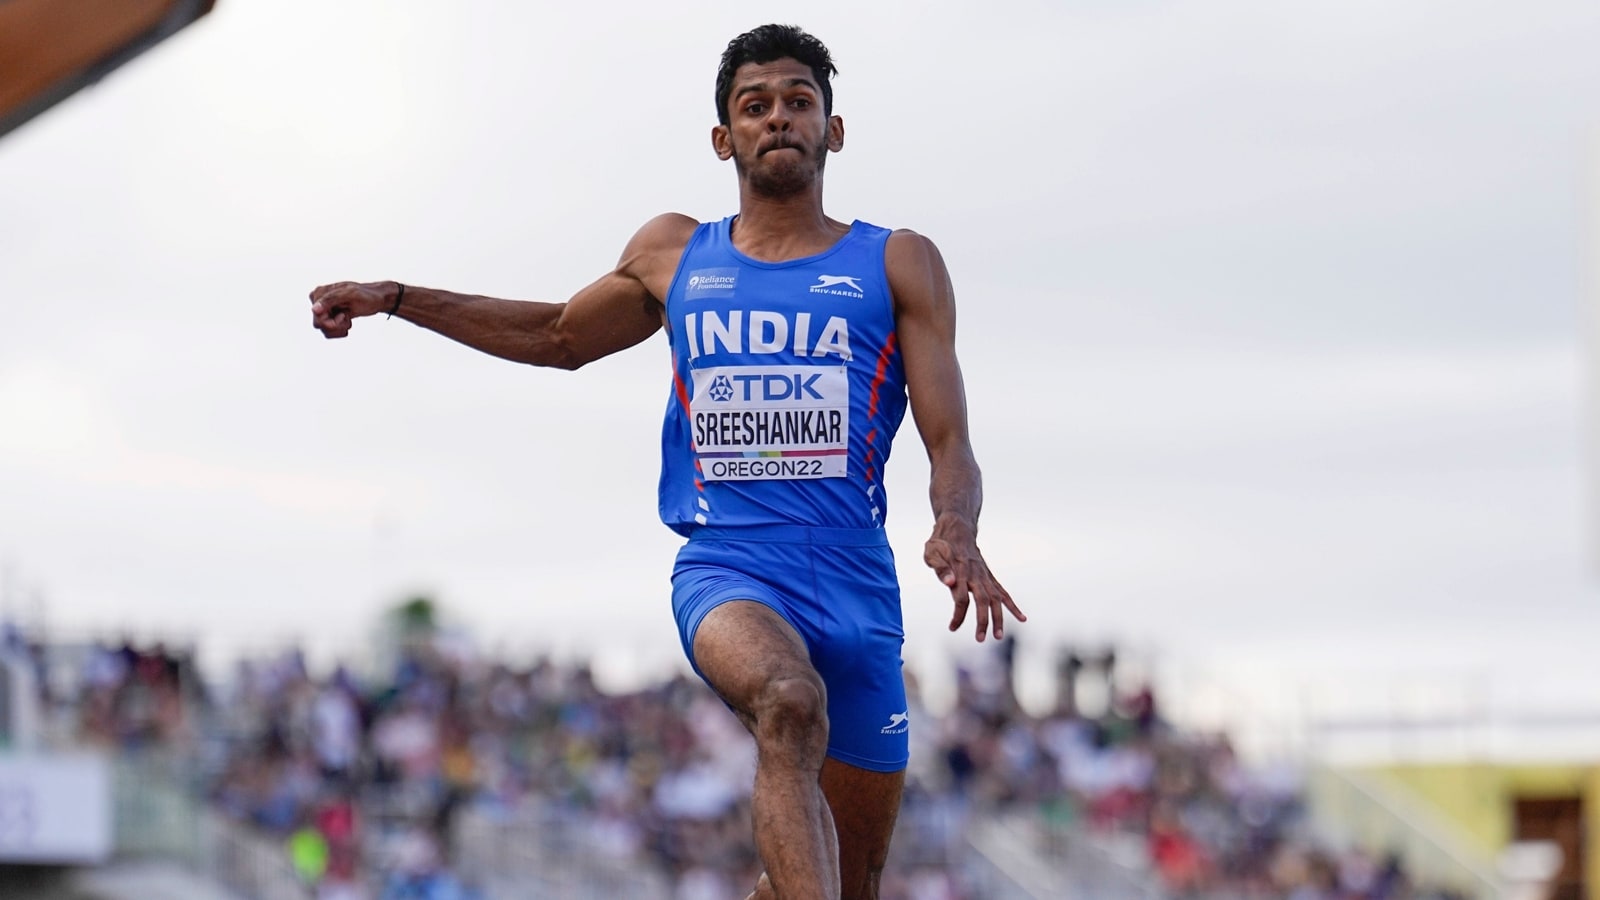 Murali Sreeshankar bags historic silver in men's long jump with 8.08m  attempt at CWG; Muhammed Anees Yahiya finishes 5th | India United Press